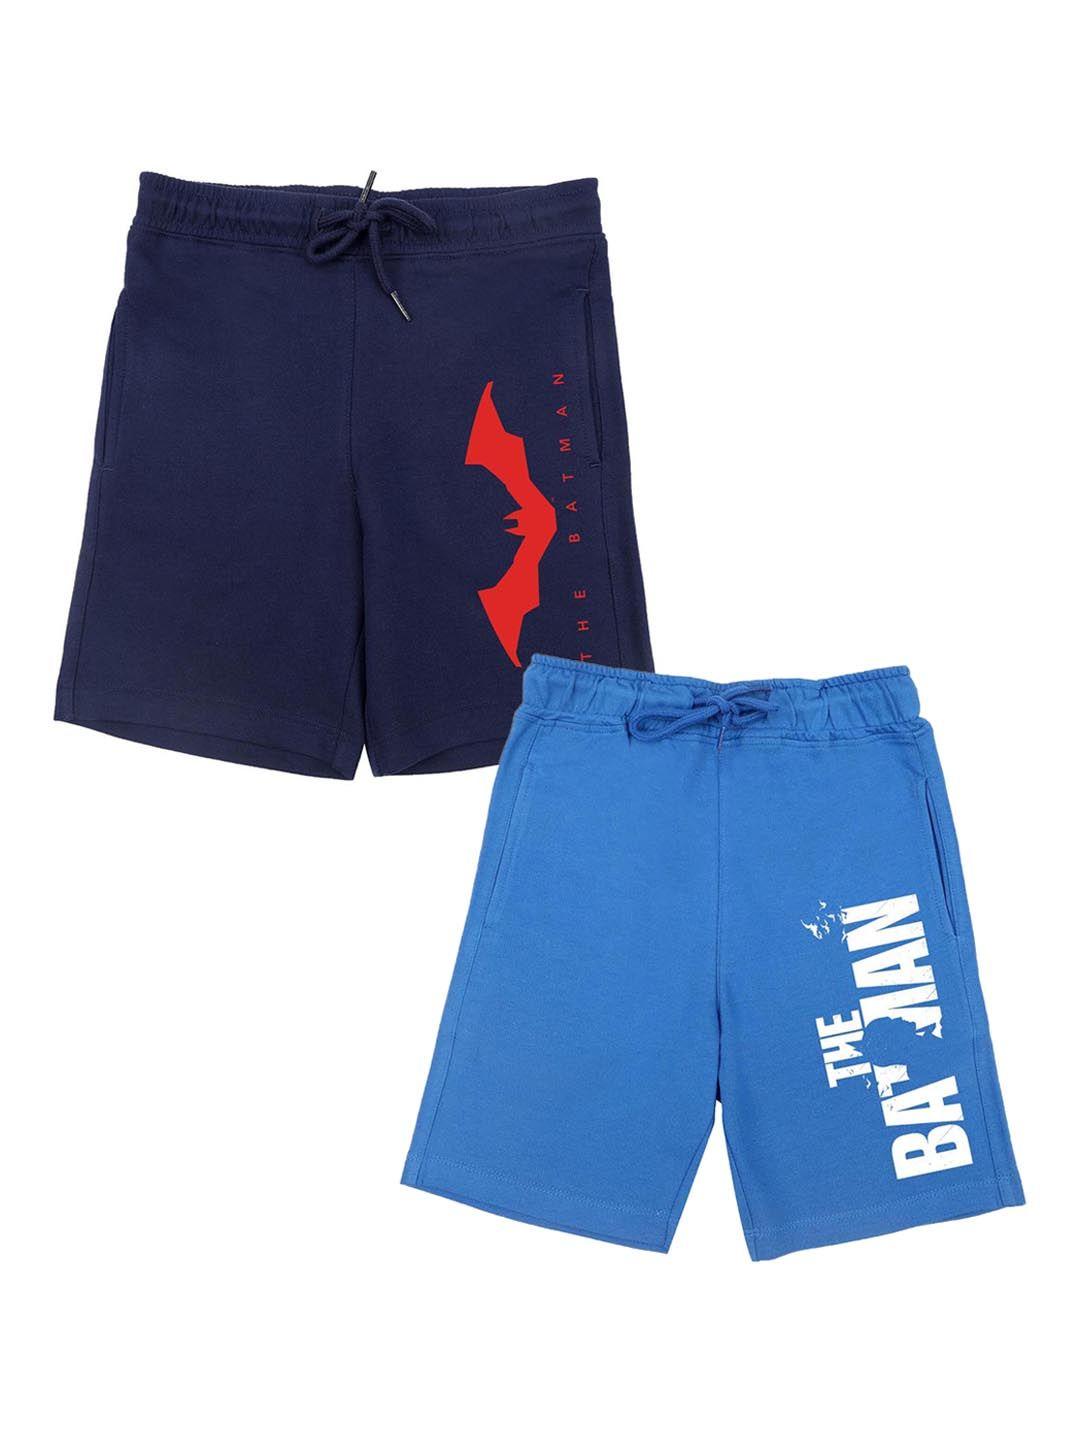 dc by wear your mind boys pack of 2 blue & navy blue superhero printed batman outdoor shorts